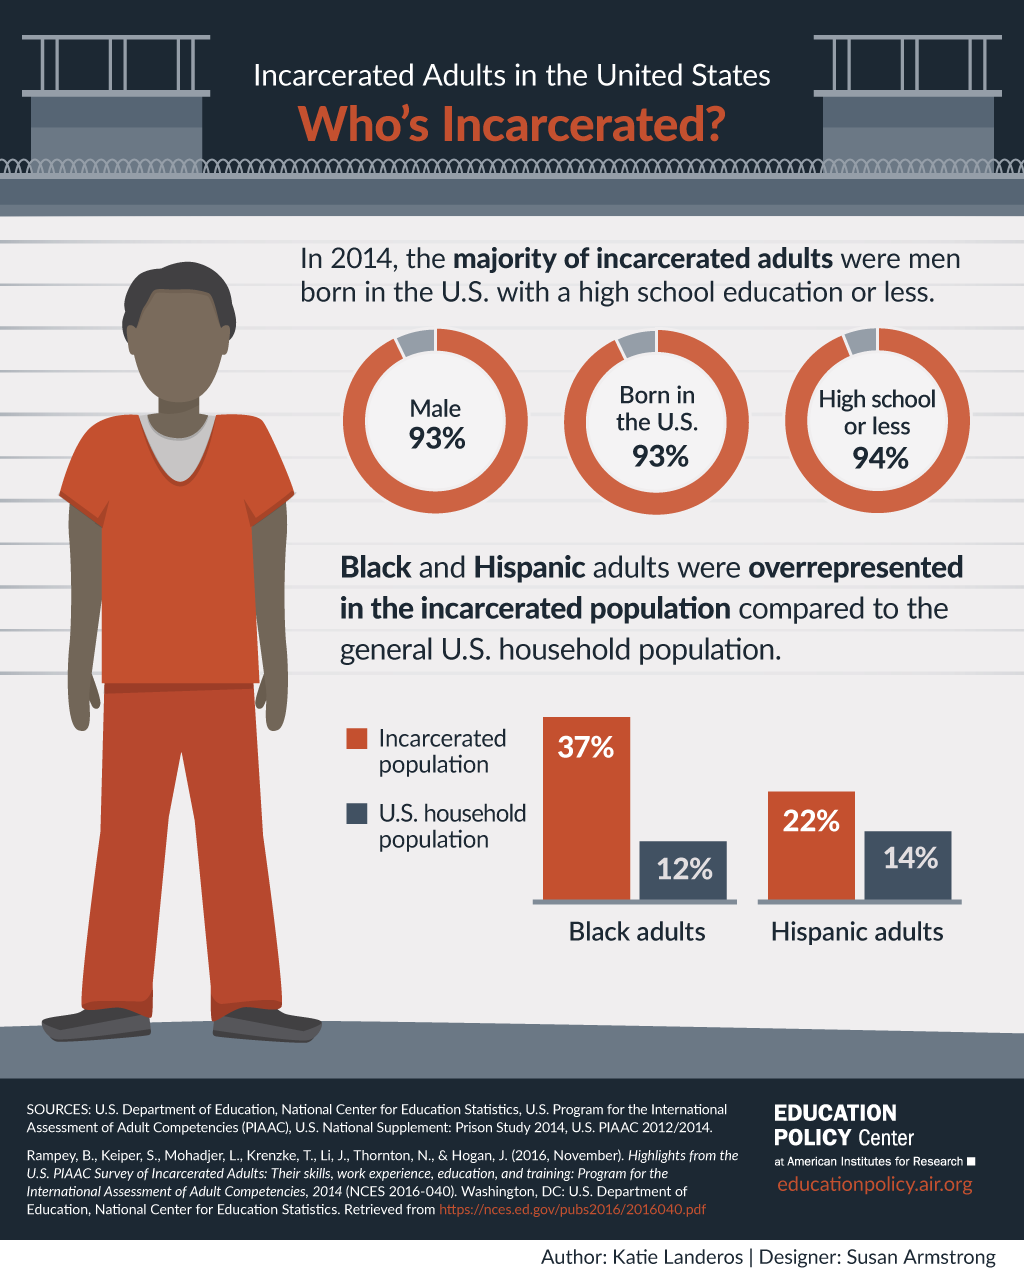 IncarceratedAdults-Infographic1.png